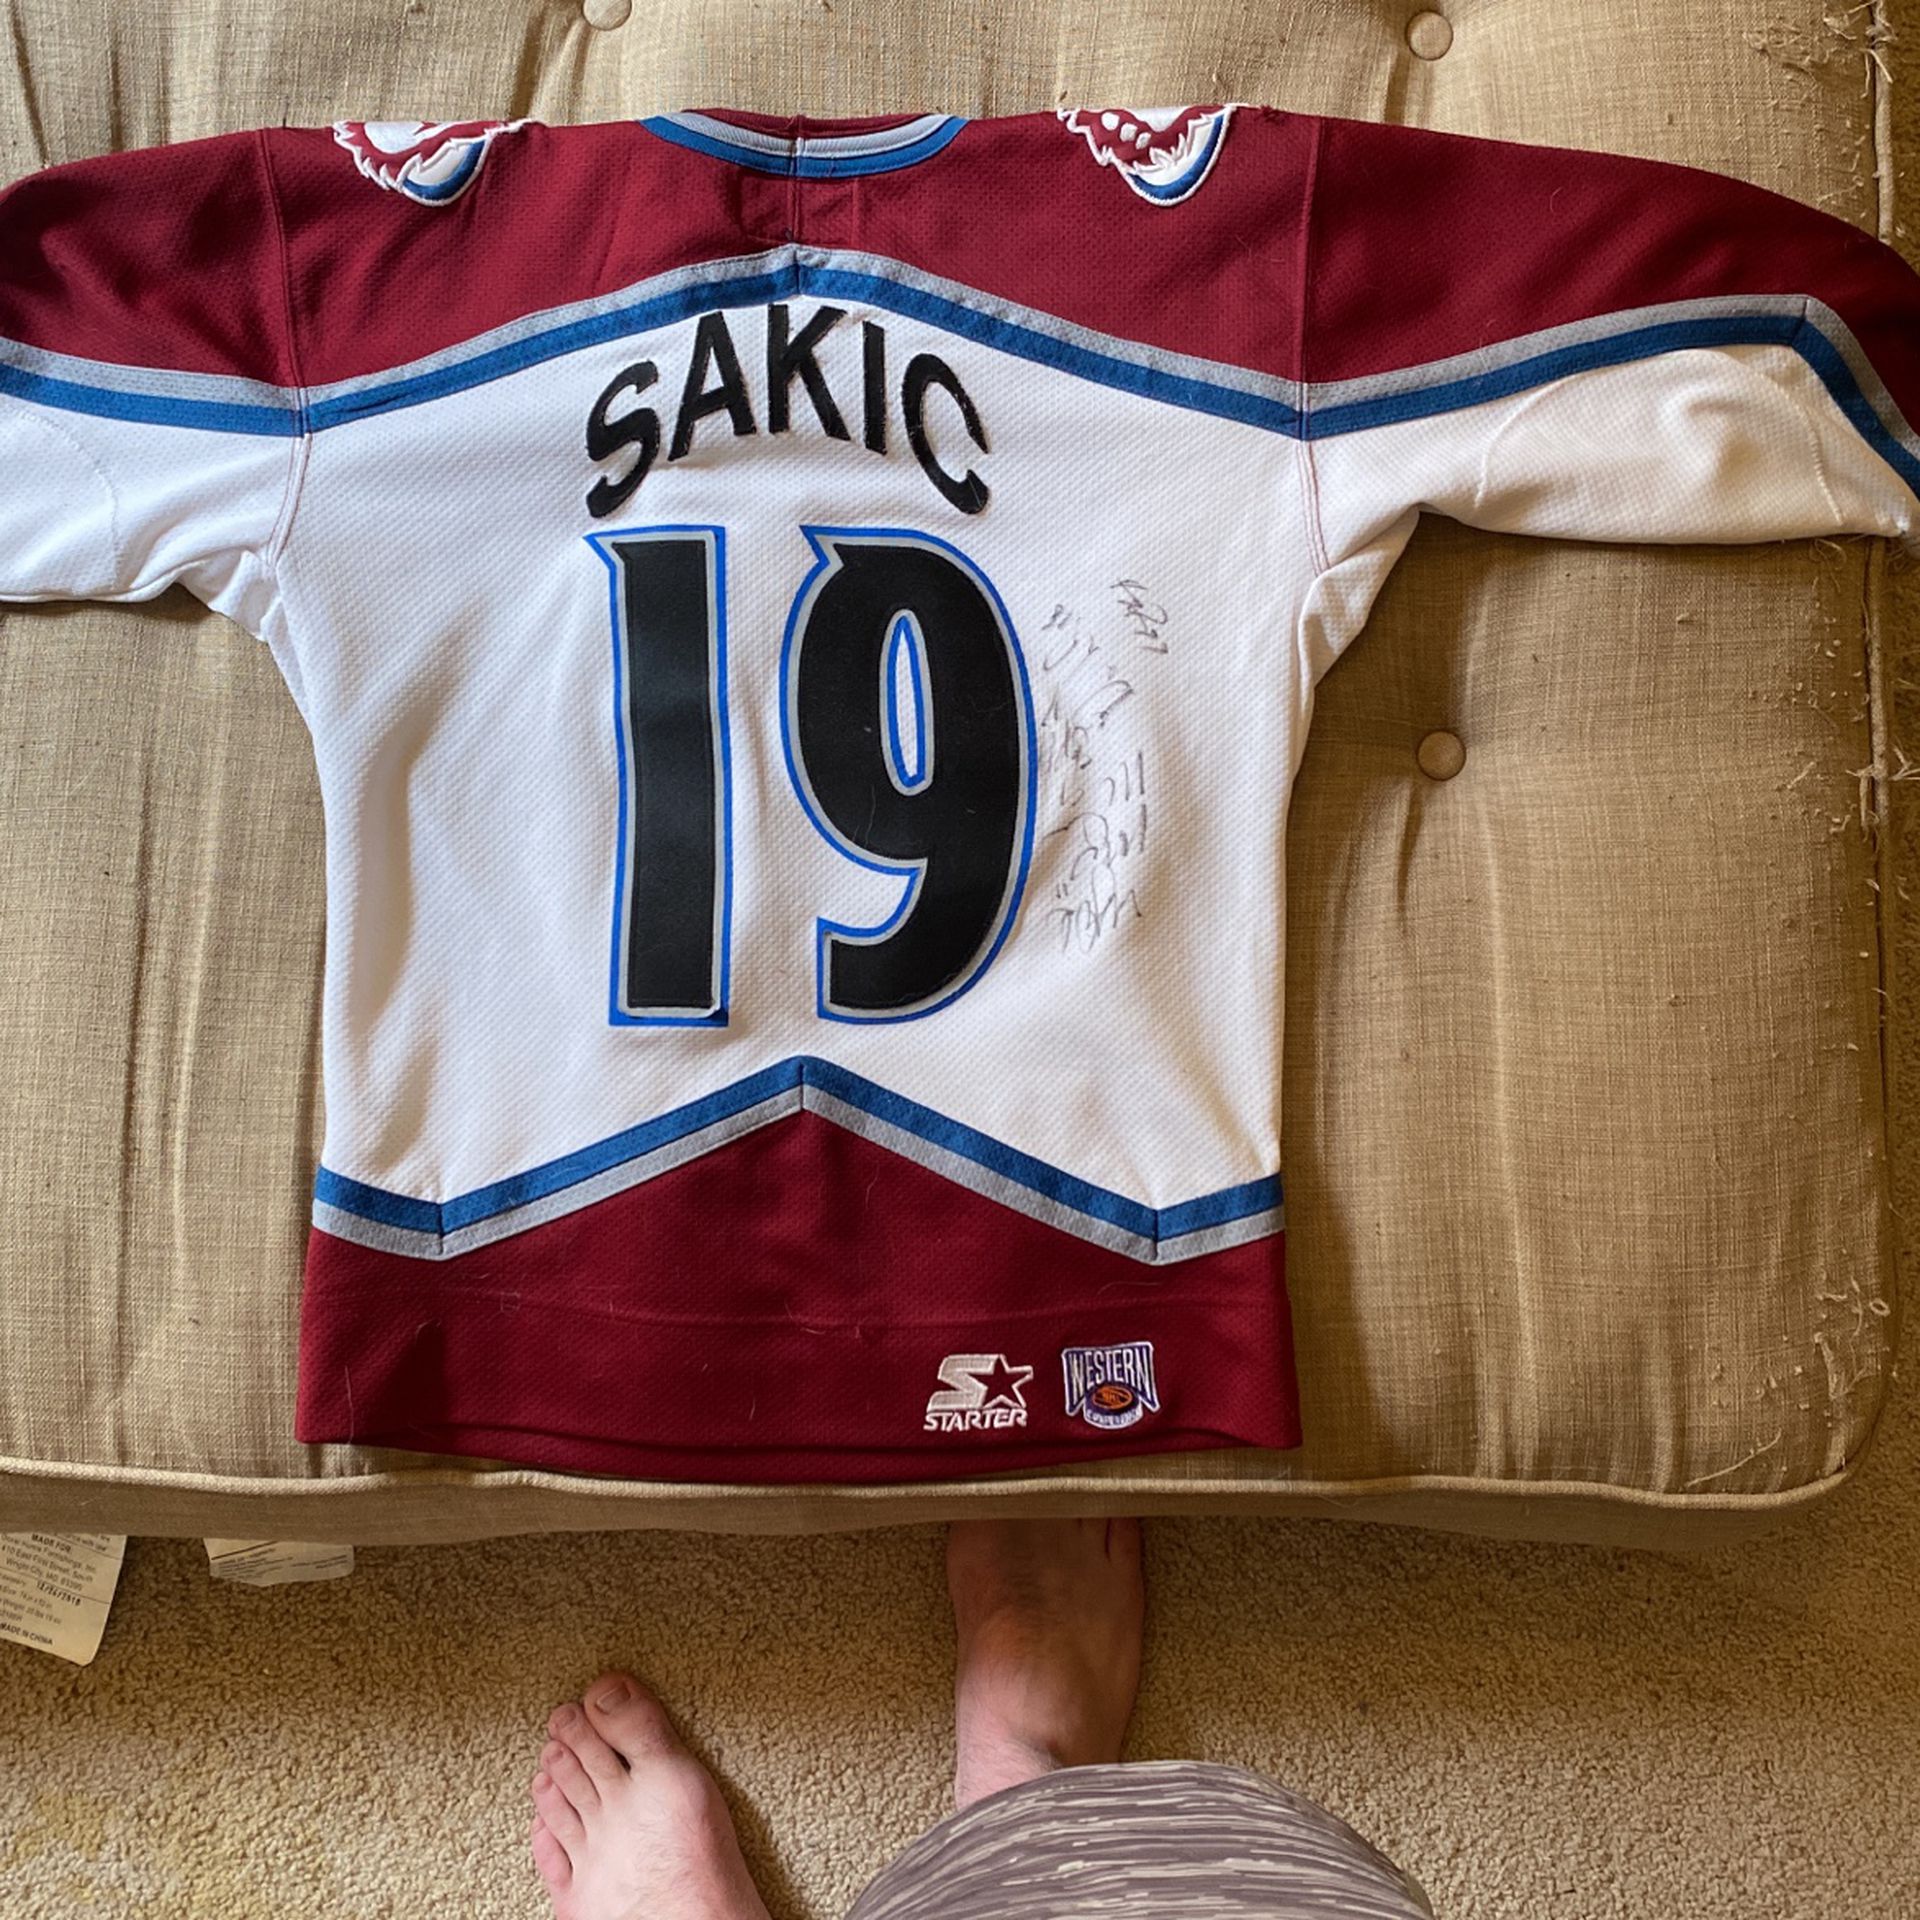 Men's M Retro CCM CO AVALANCHE JERSEY!!!! for Sale in Colorado Springs, CO  - OfferUp